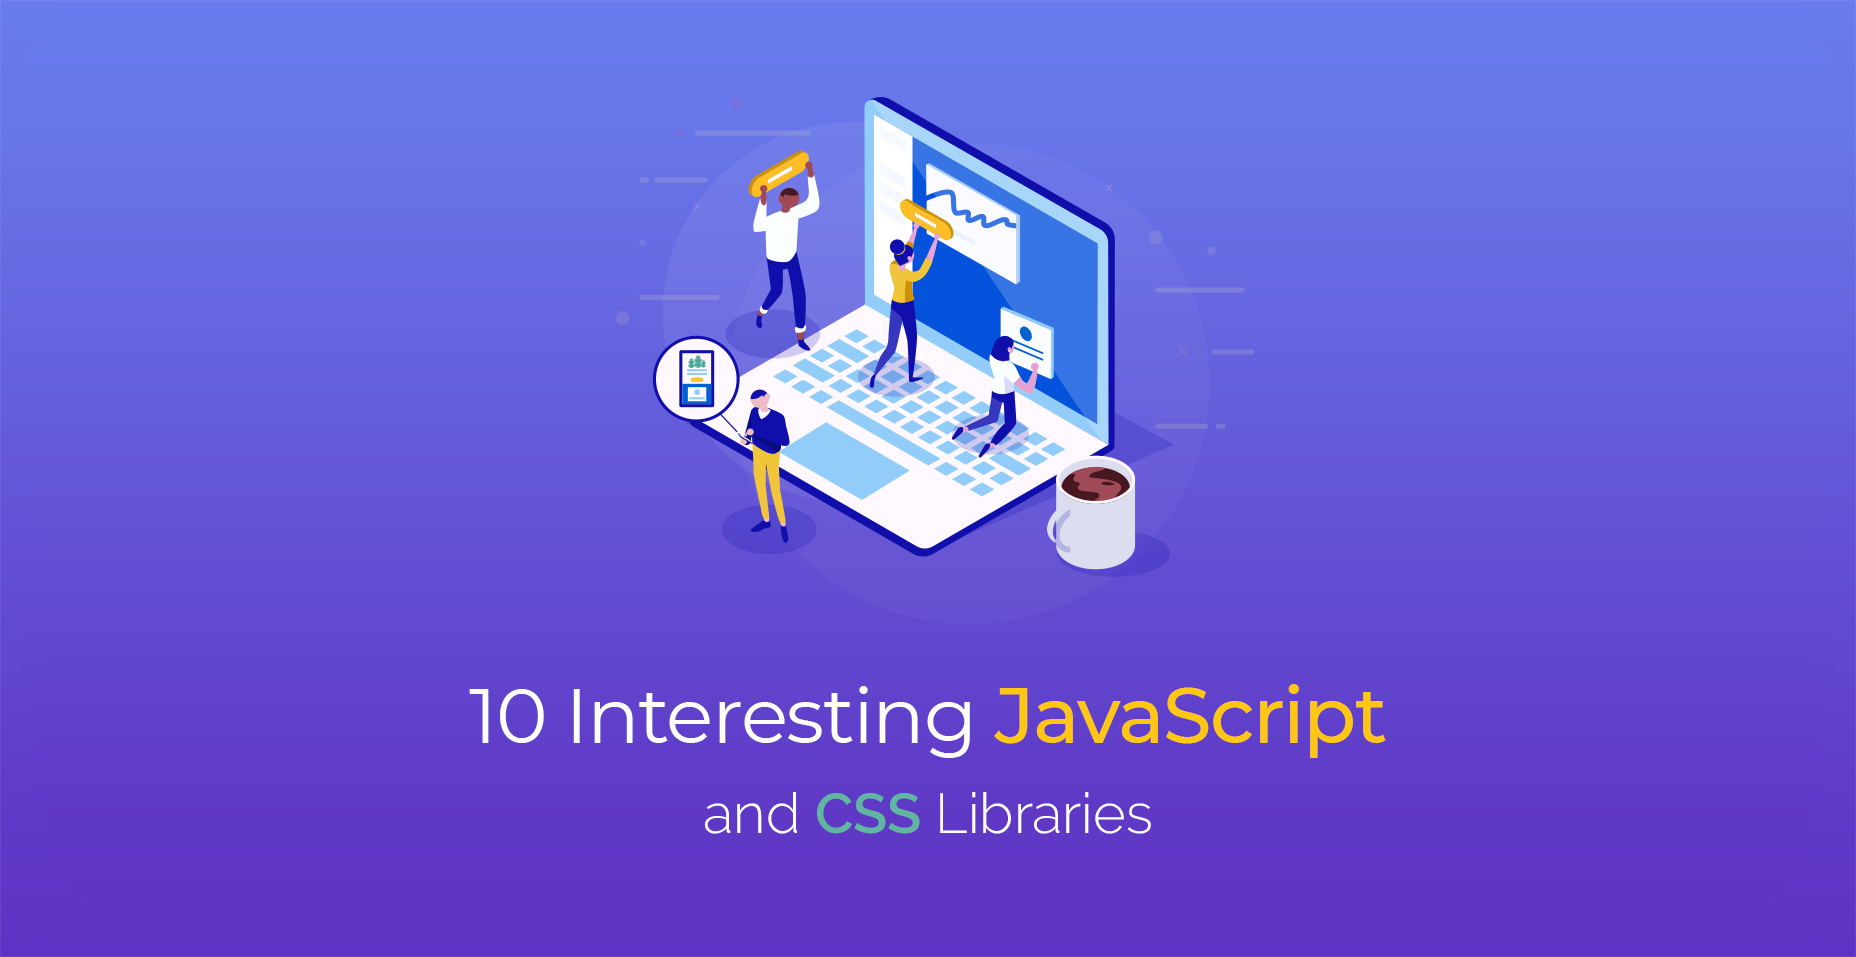 10 Interesting JavaScript and CSS Libraries for February 2019